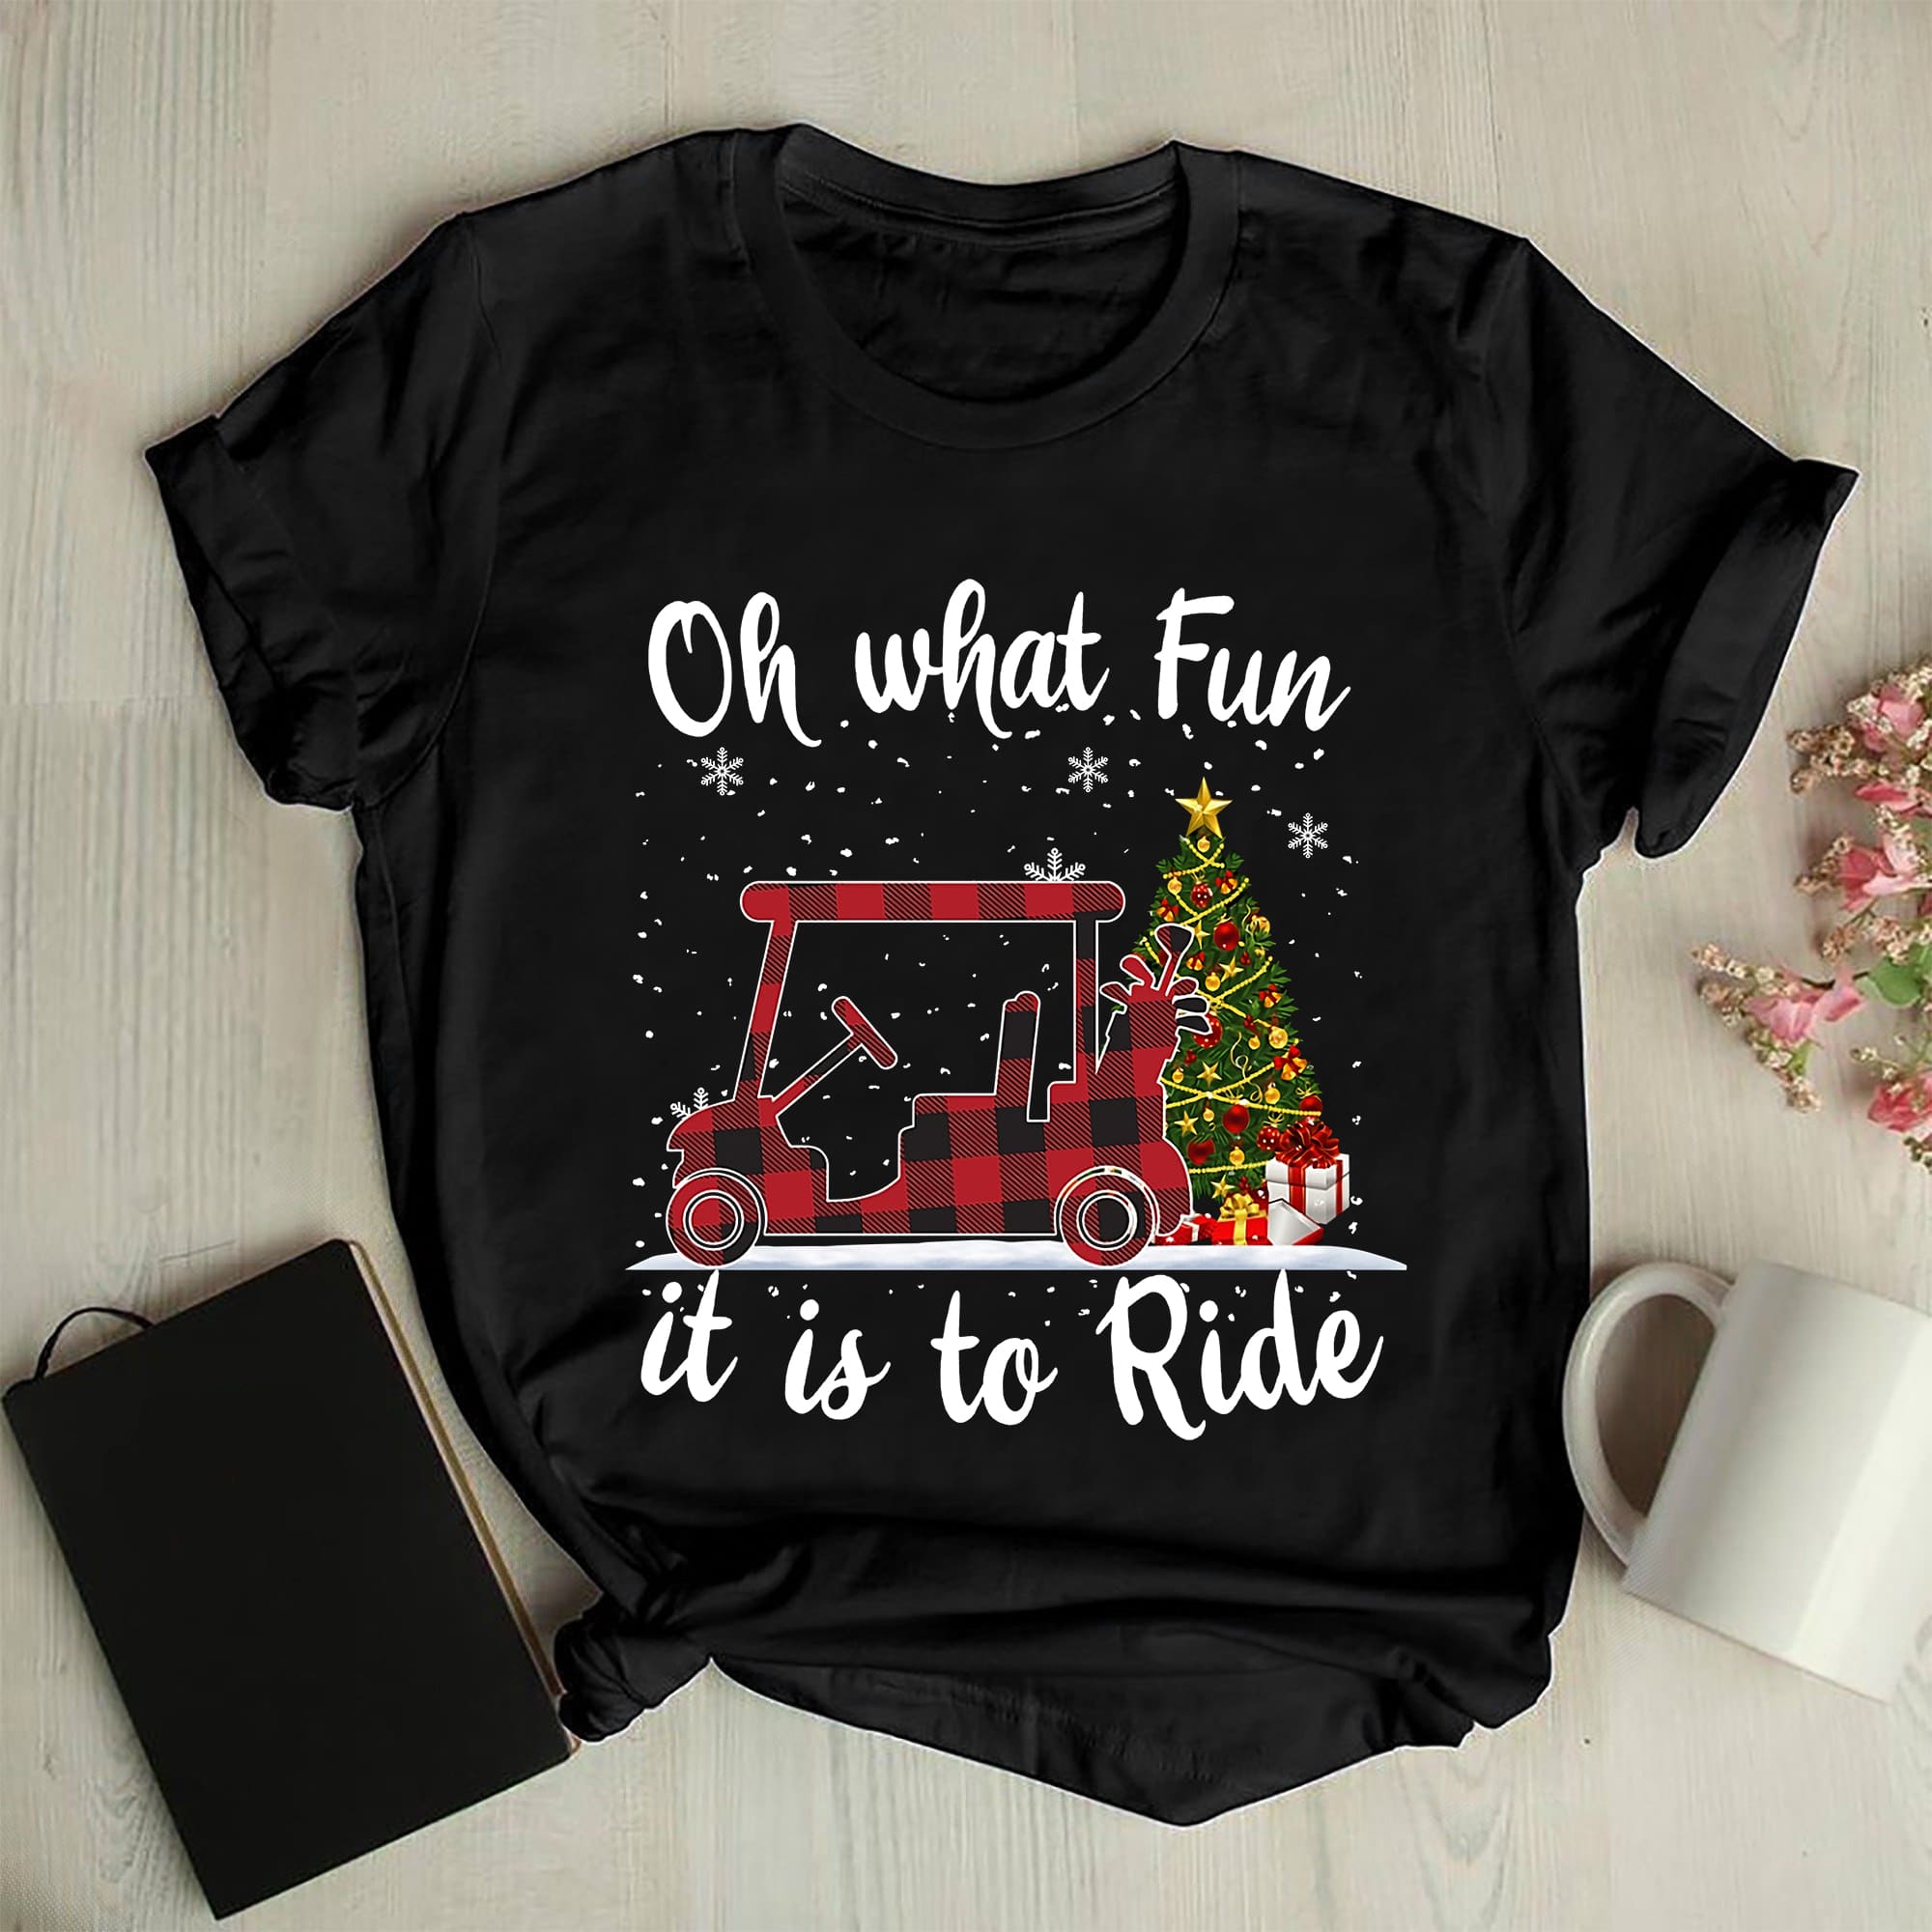 Oh what fun it is to ride - Ride the golf cart, gift for golfer, Christmas ugly sweater